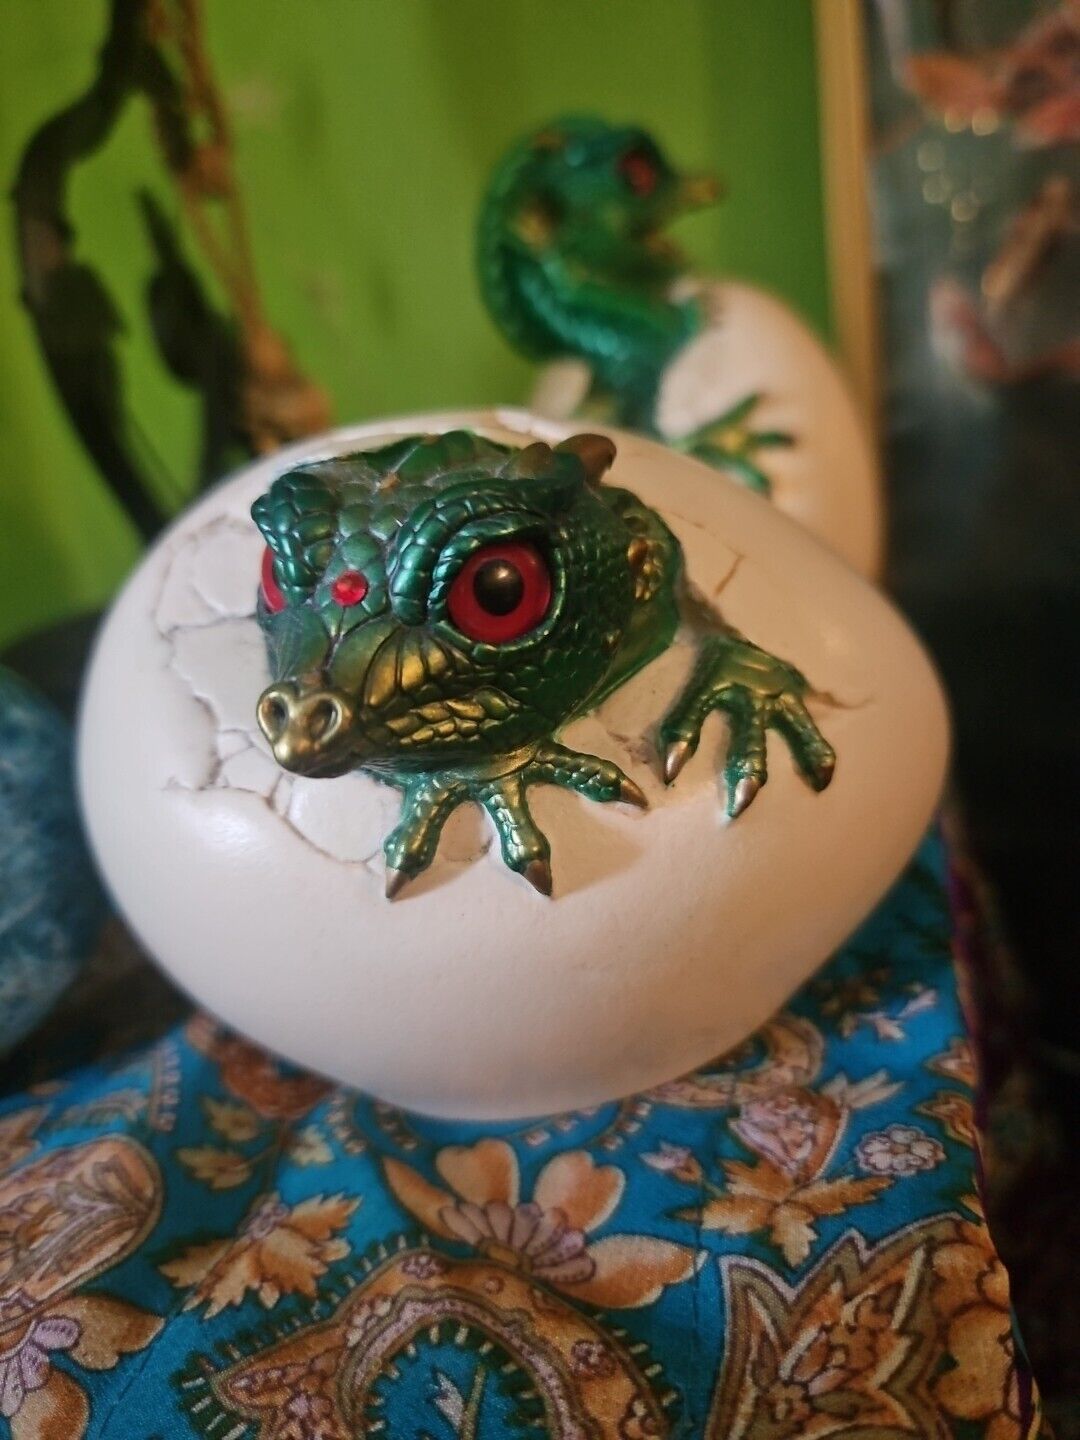 Windstone Editions Emerald Hatching Kinglet Dragon Mint Condition Melody Pena 